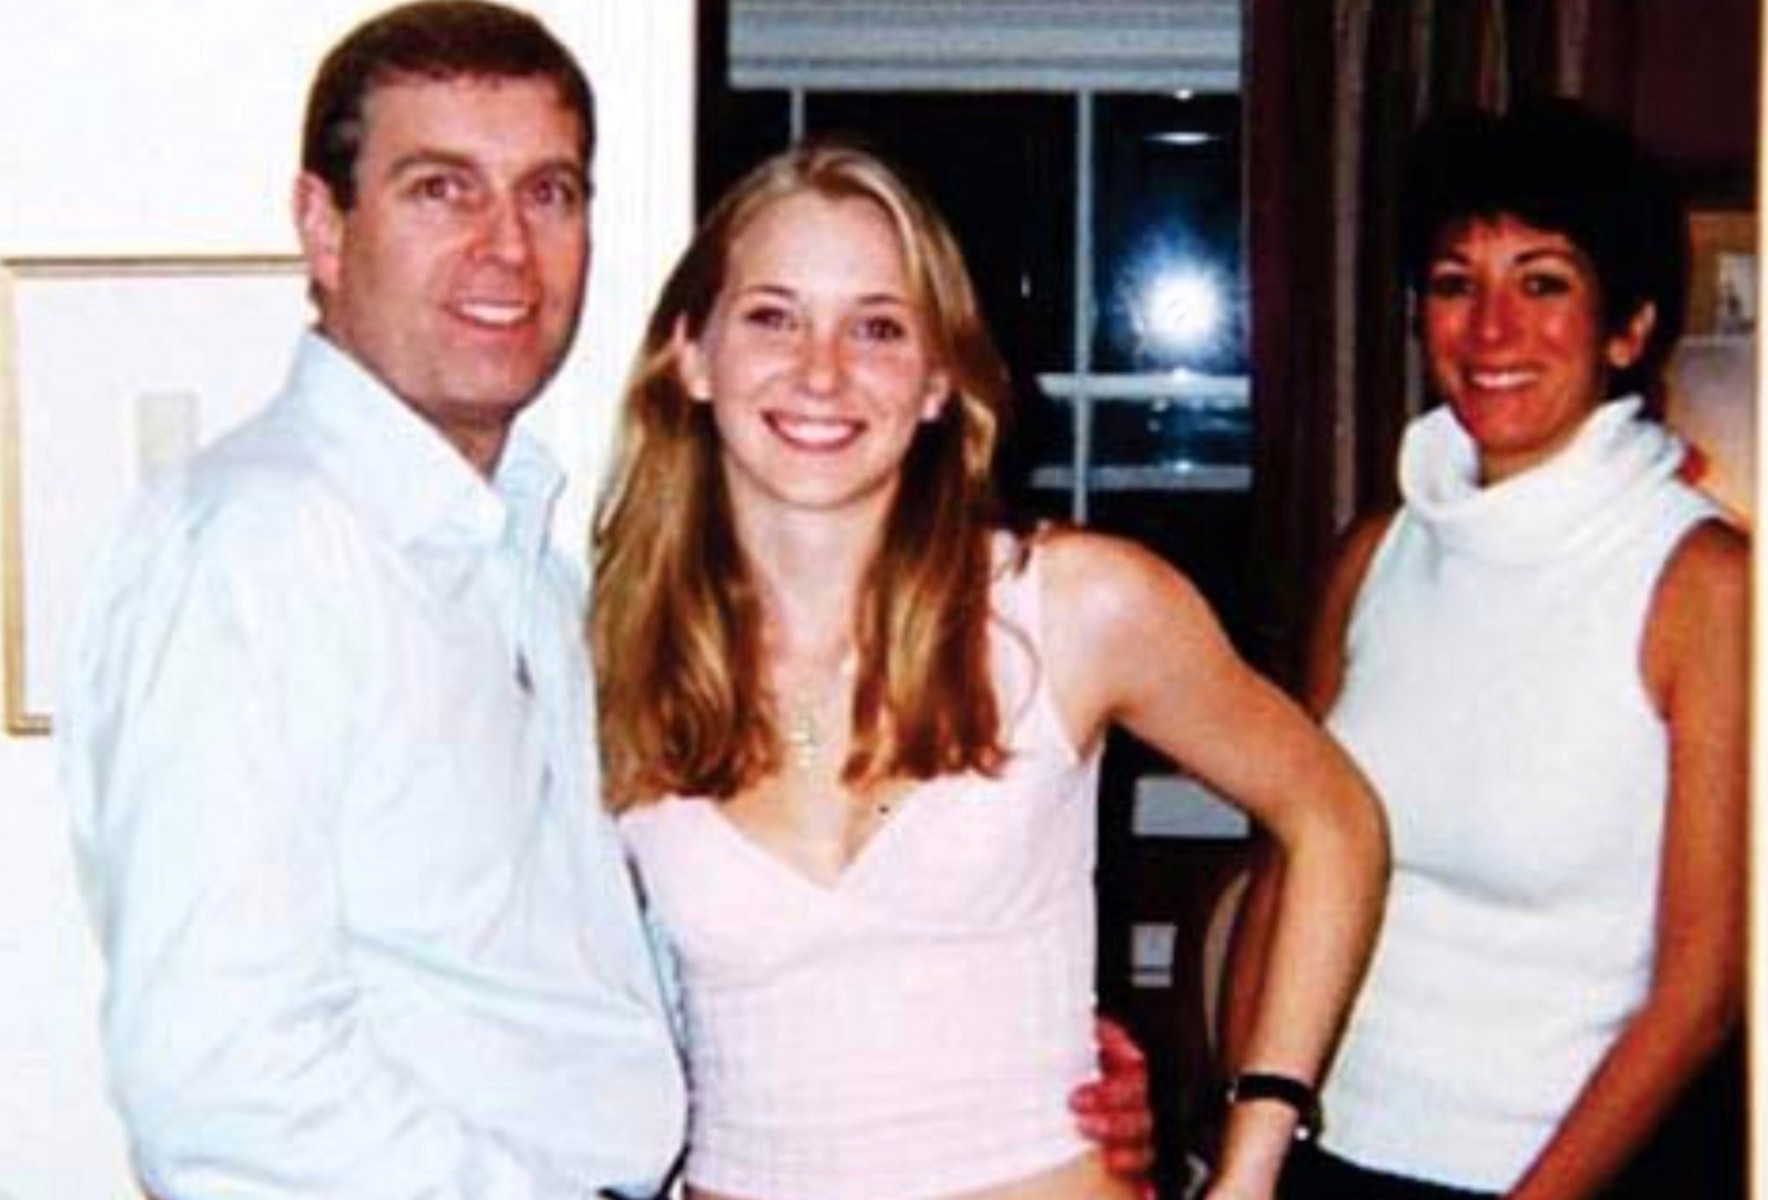 Prince Andrew is pictured with Virginia Roberts, who claimed she had sex with the royal when she was 17 - something he has always denied